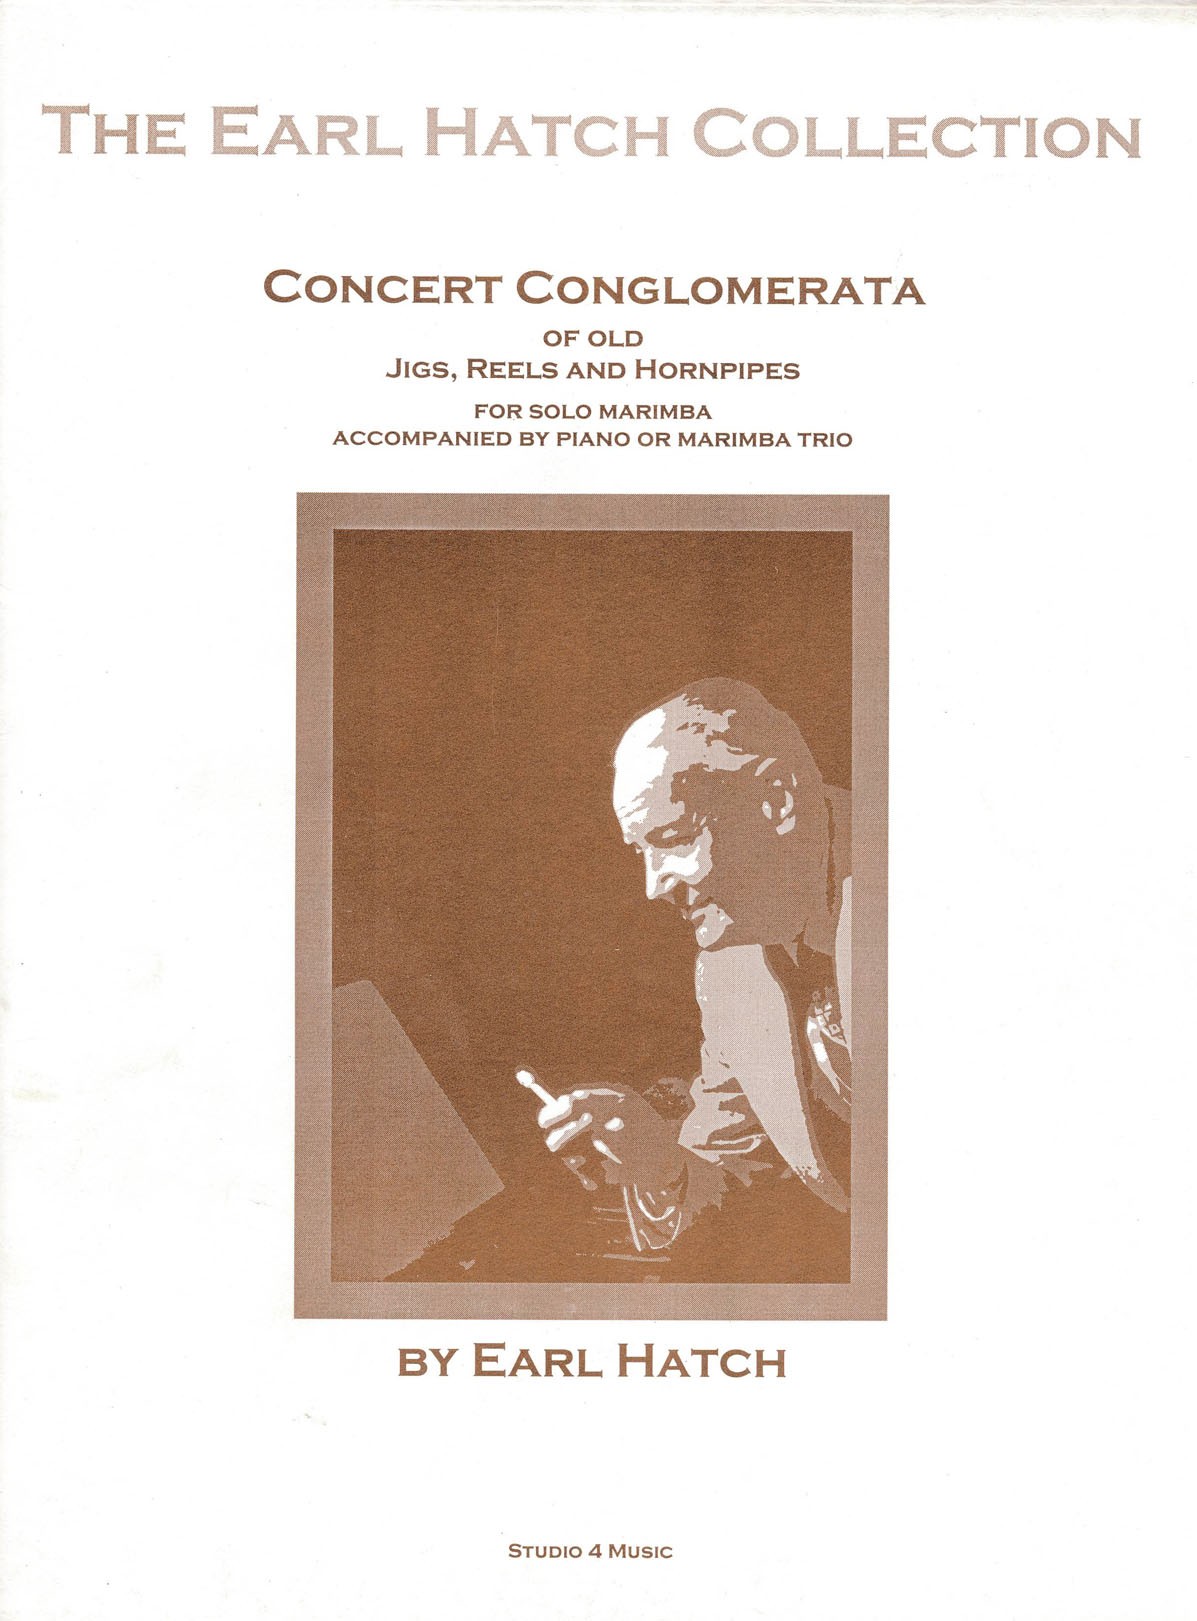 Concerto Conglomerata of Old Jigs, Reels and Hornpipes arr. Earl Hatch